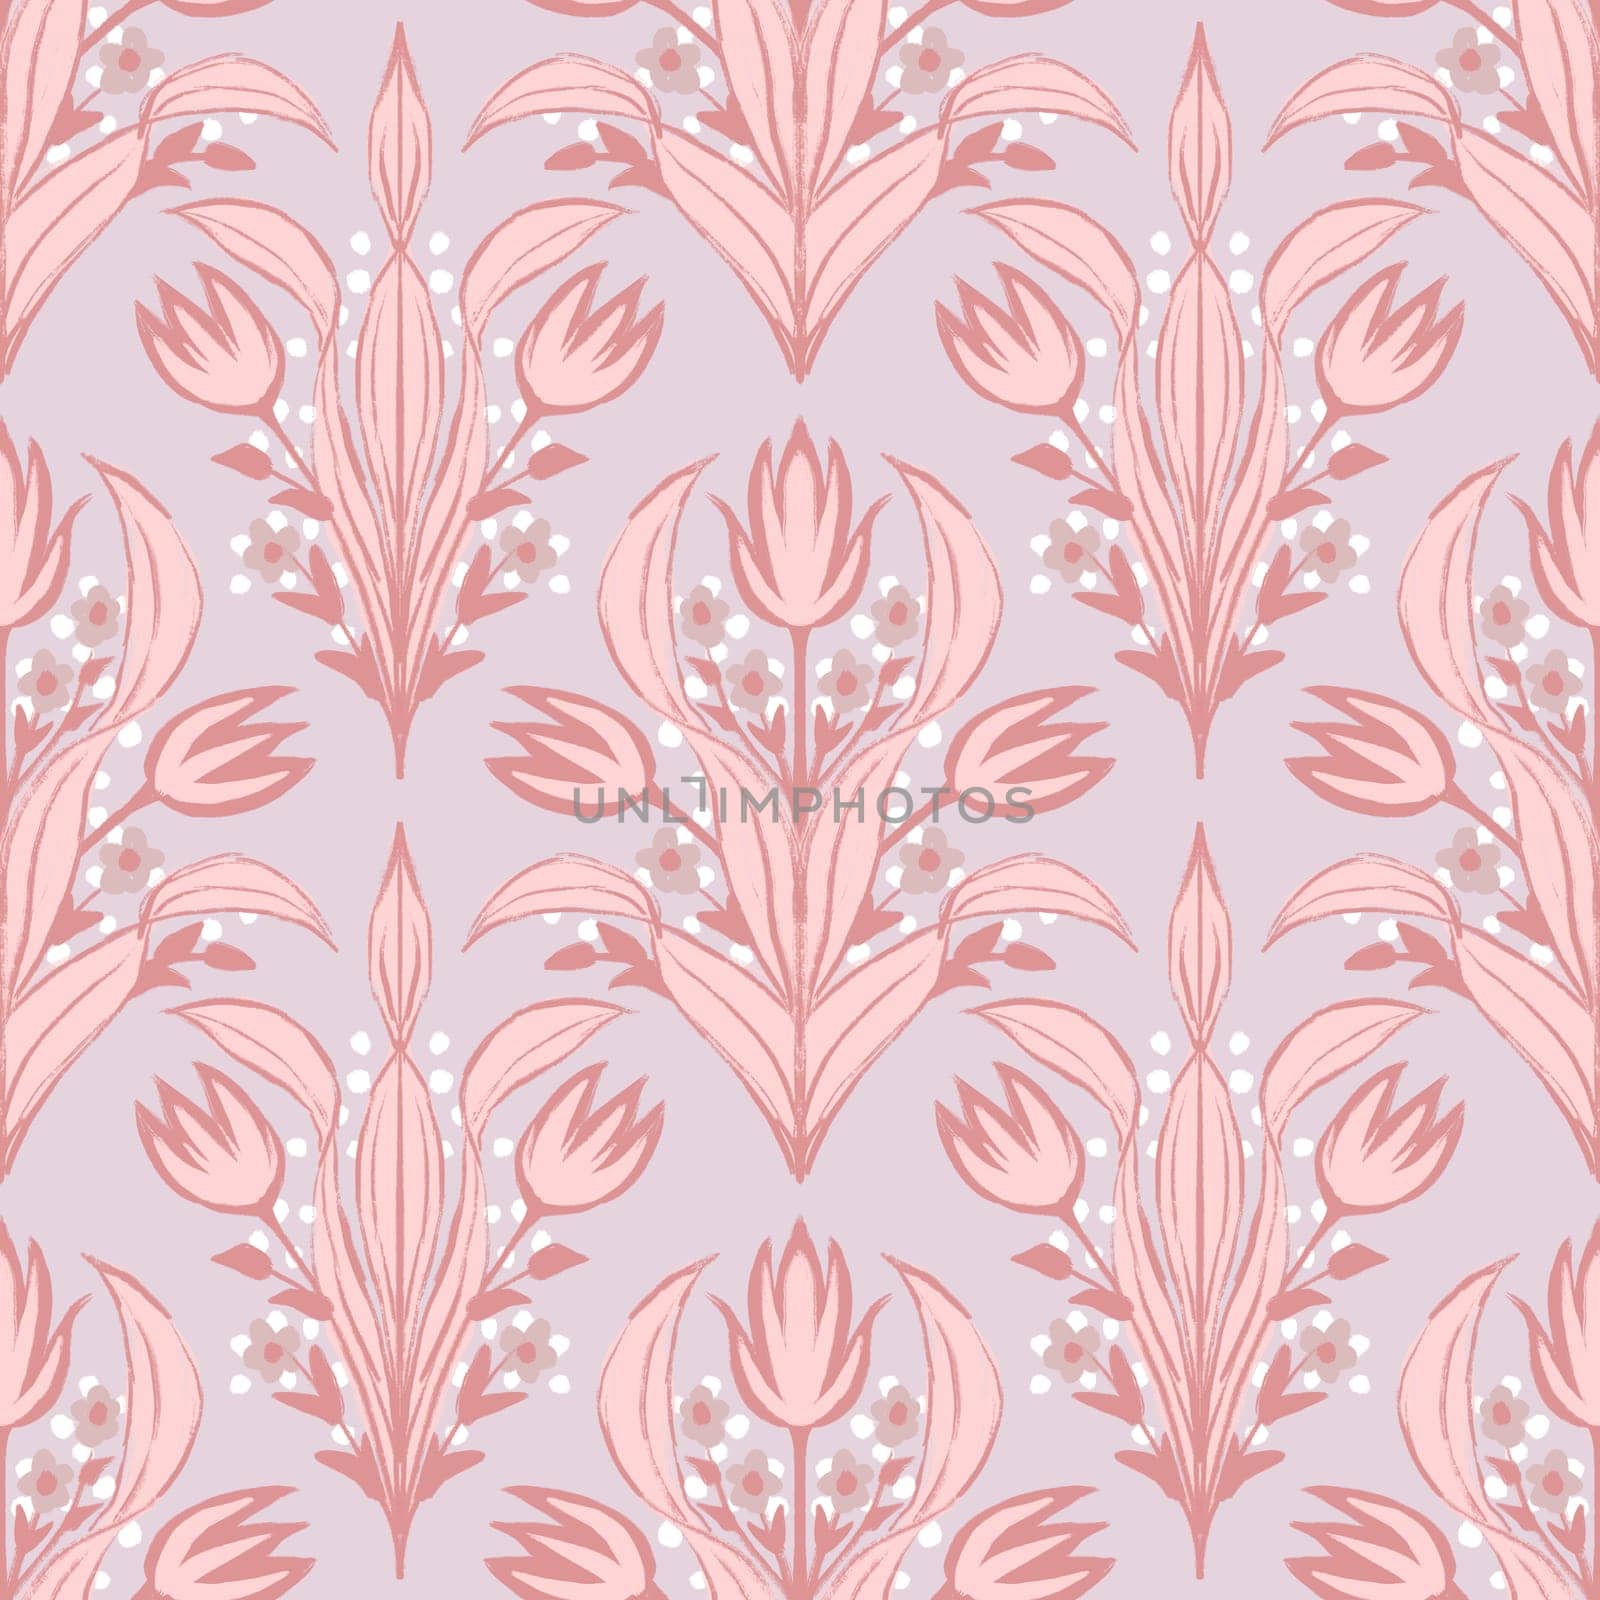 Hand drawn seamless pattern of pink pastel tulip flowers in victorian vintage retro style. Floral bouquets in beige white elegant arrangements, for wallpaper wrapping paper textile, decoration fabric